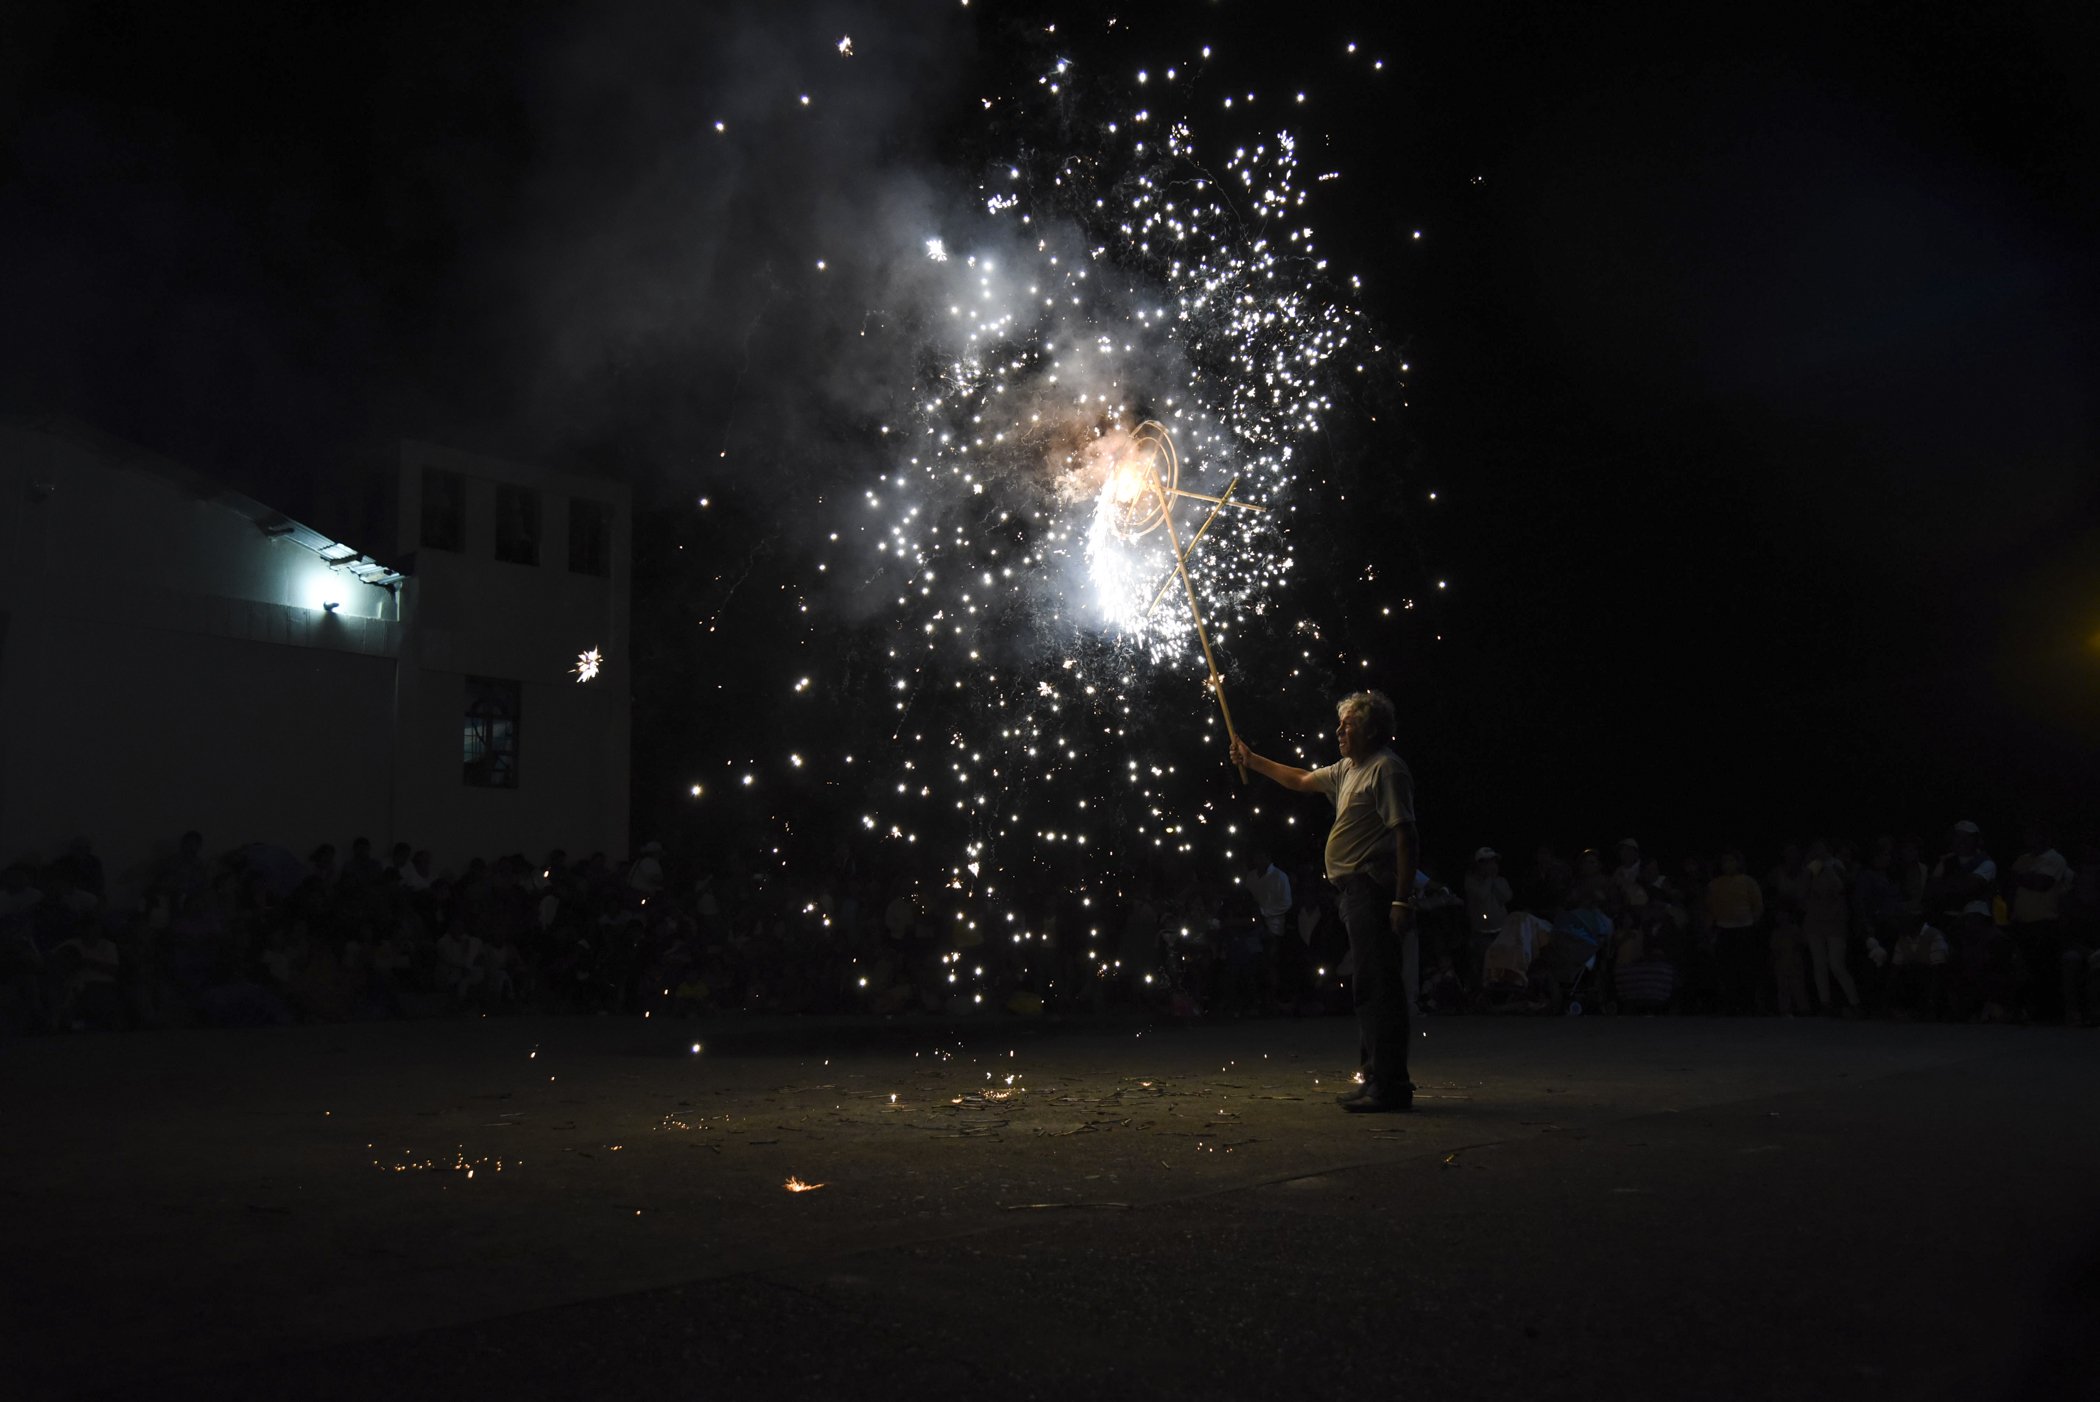  A man ignites a firework display for a crowd of onlookers during a town anniversary celebration in Pillcopata, Peru.  